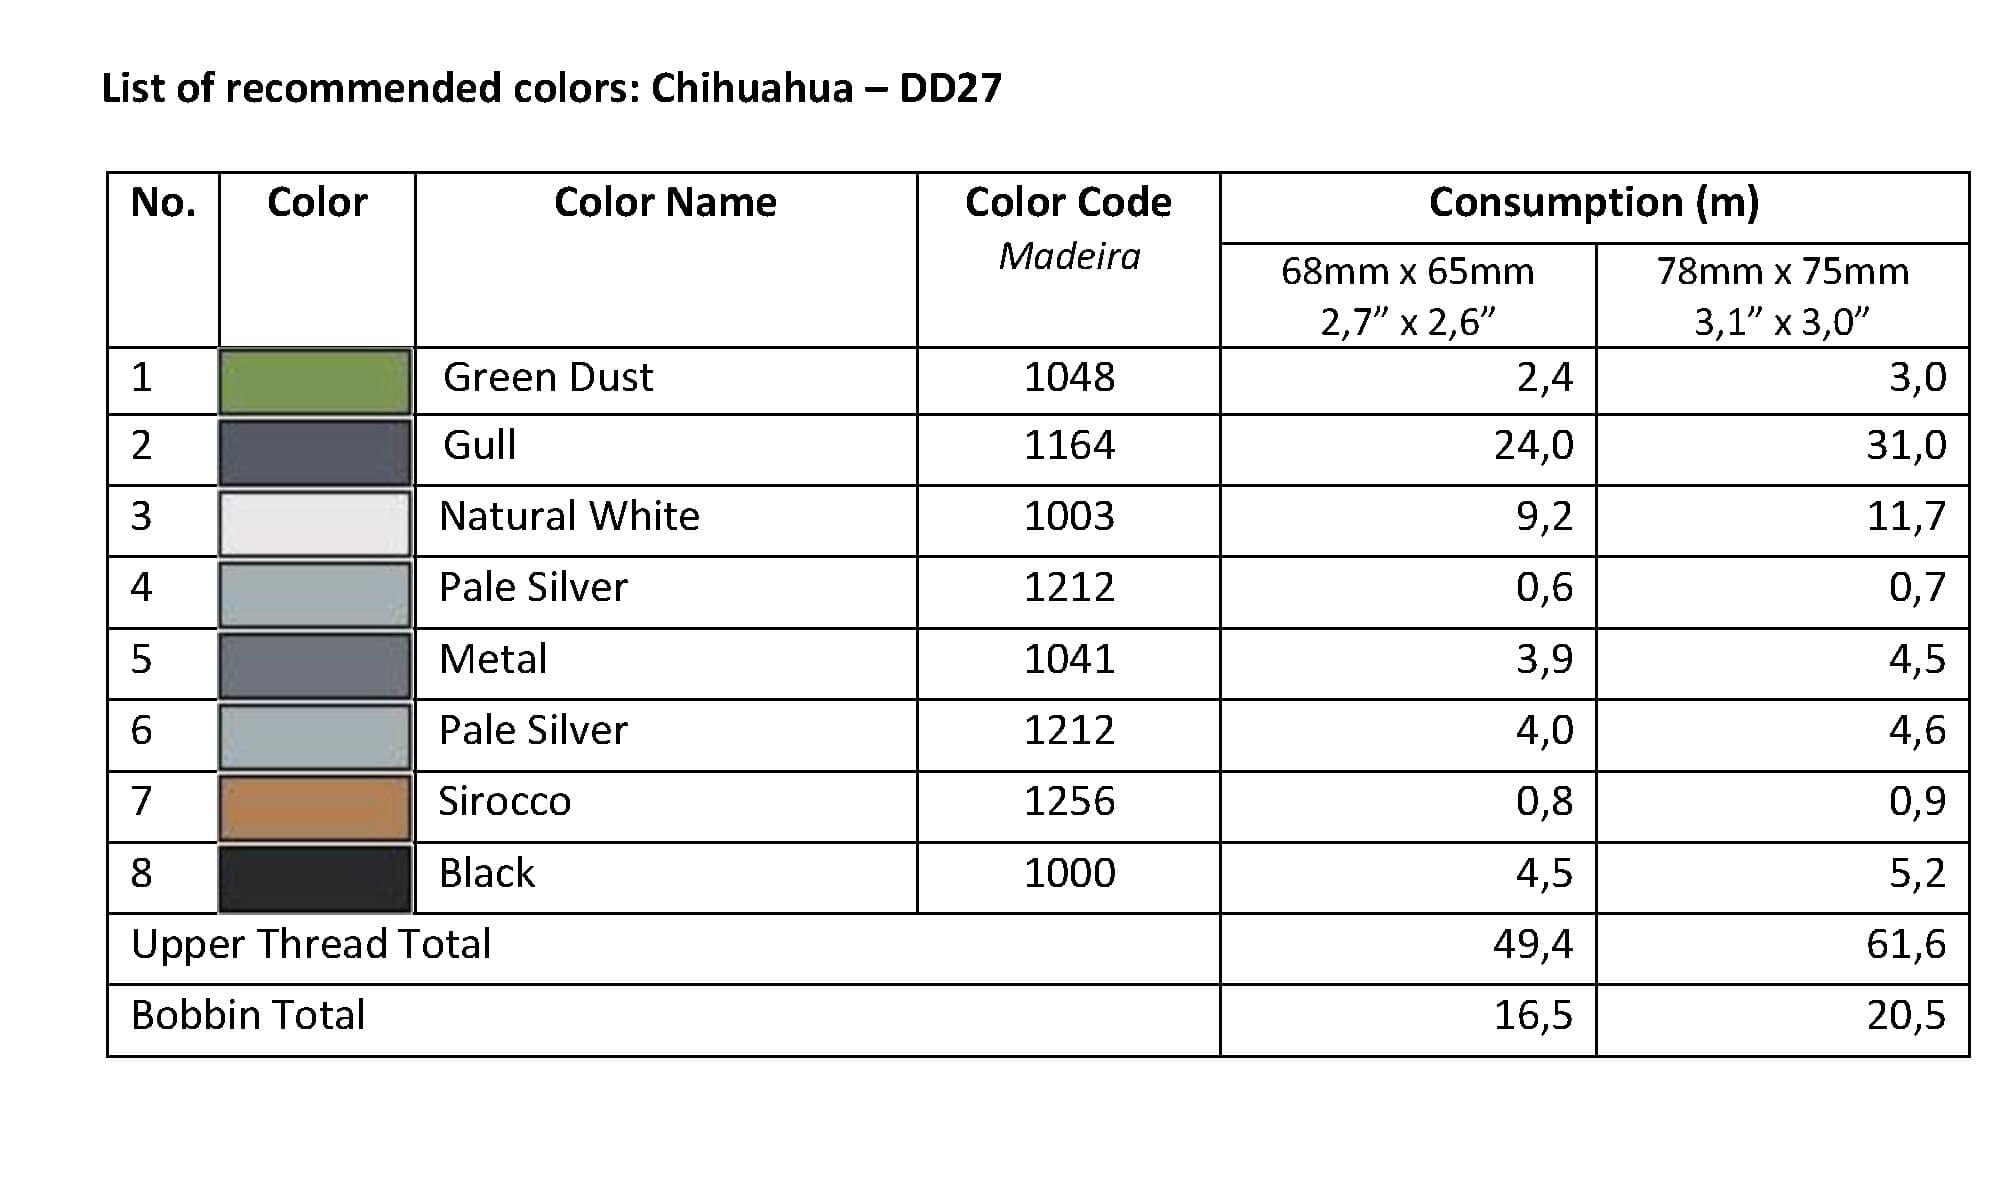 List of Recommended Colors - Chihuahua DD27